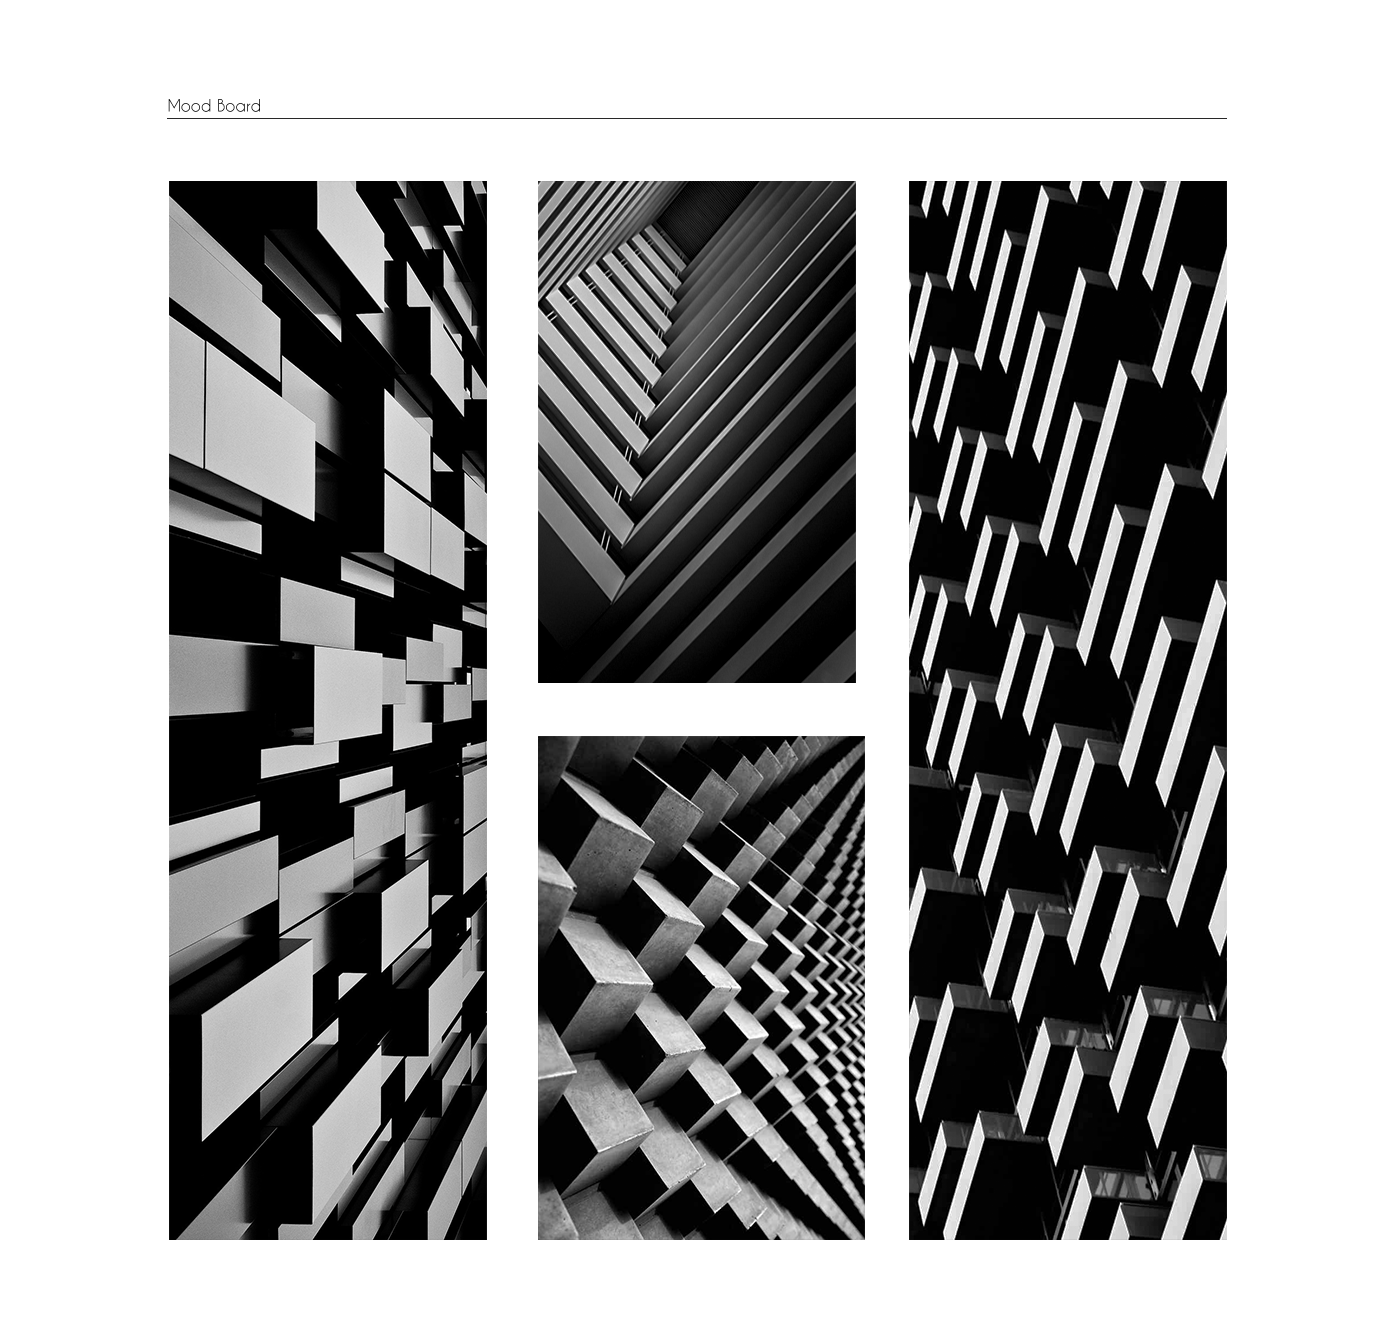 architecture black White simple abstract Technology metal lithium architects mousa